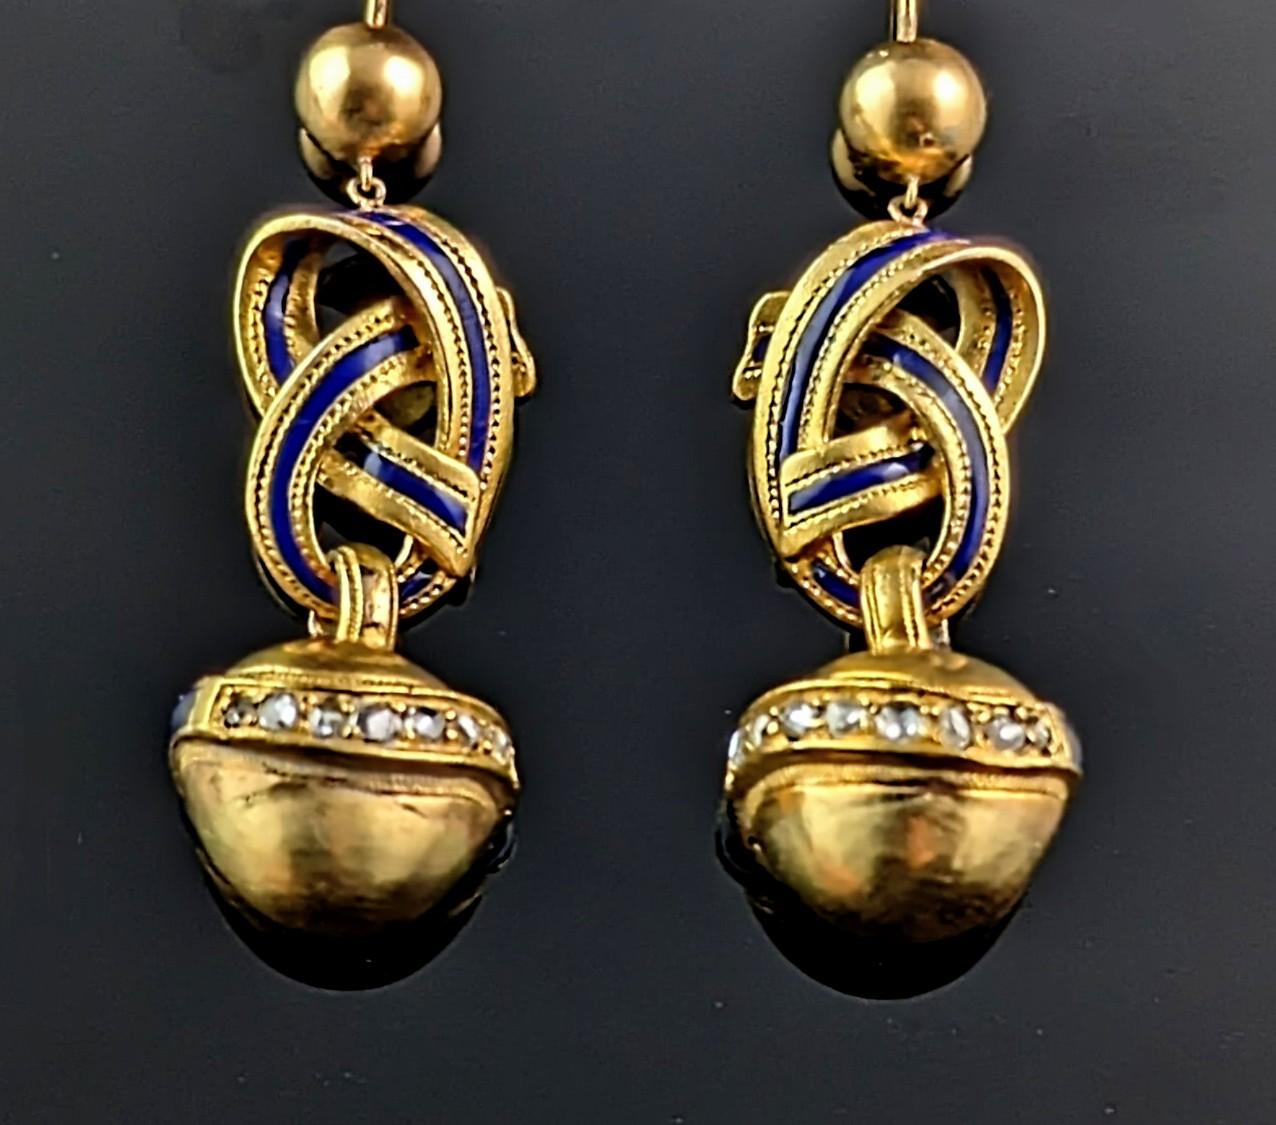 A gorgeous pair of antique Victorian lovers knot earrings.

The lovers knot has become such a revered symbol in Victorian jewellery, a romantic sentiment also known as the true love knot is a symbol of a couples strong bond to one another.

These